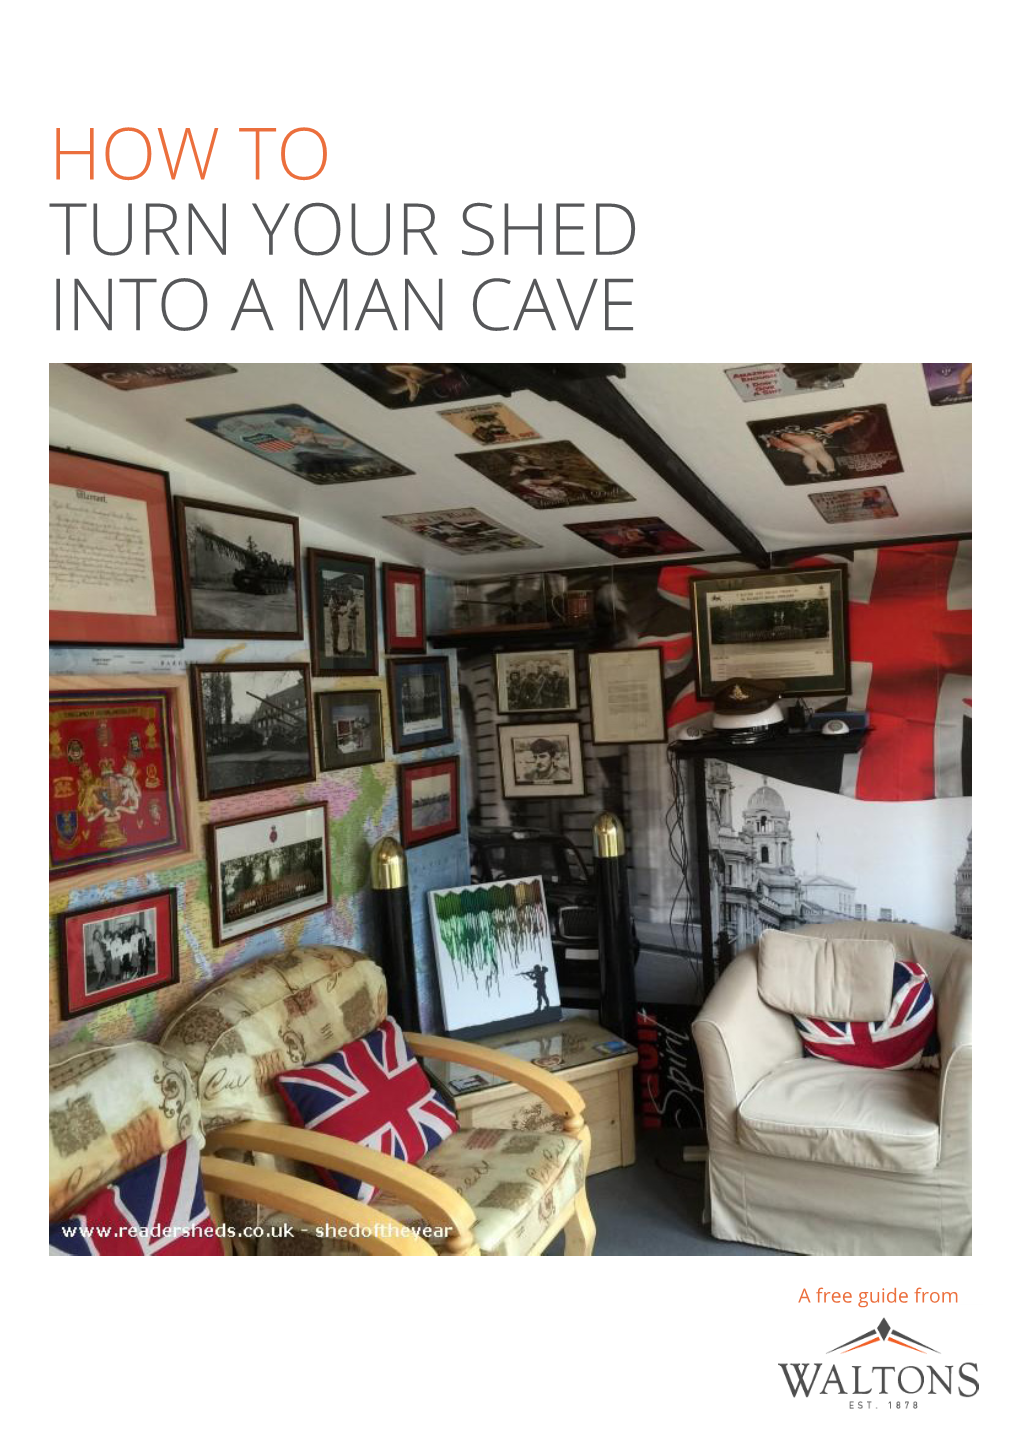 How to Turn Your Shed Into a Man Cave